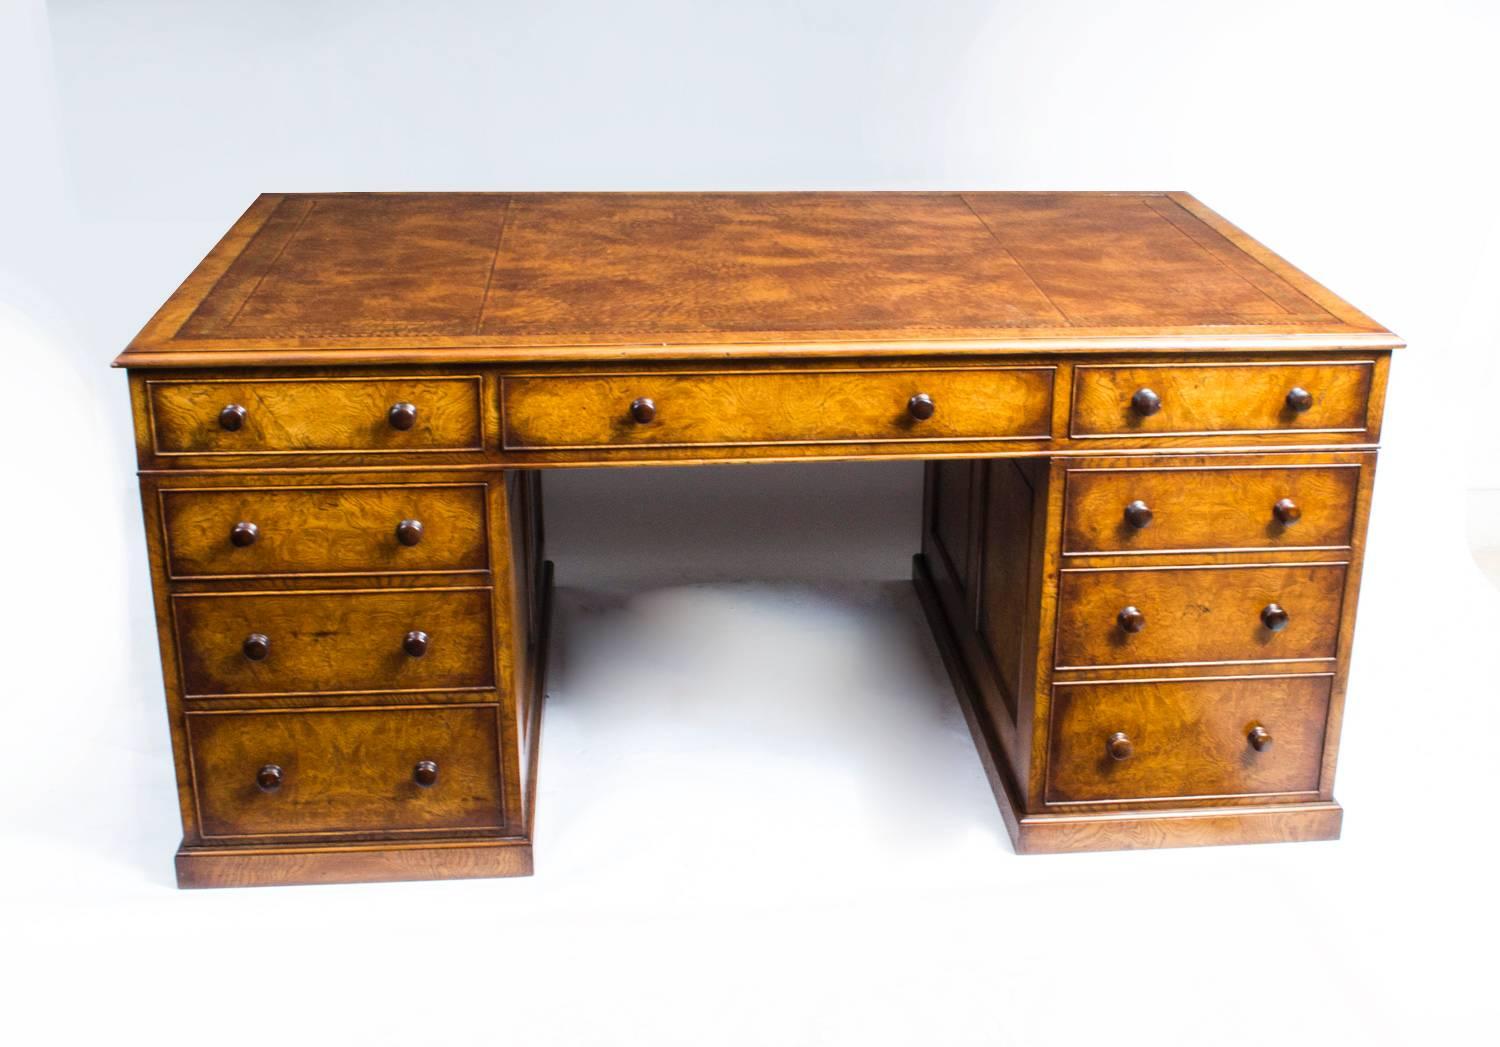 This is a beautiful antique Edwardian pollard oak and solid oak pedestal partners desk, circa 1860 in date.

The desk is made from solid oak with wonderful burr Pollard Oak veneers. It is fitted to one side with one long and two short frieze